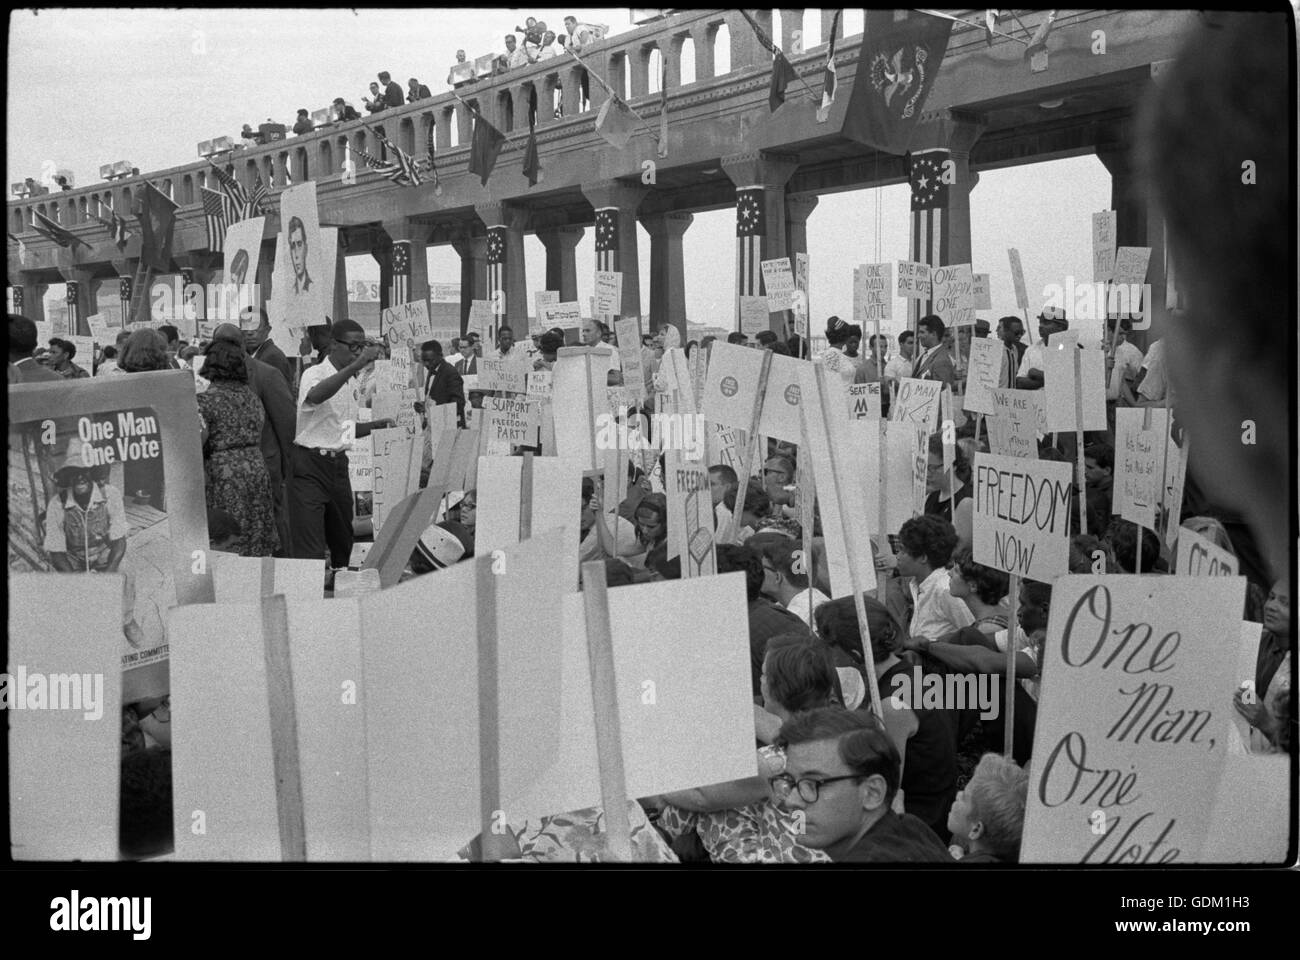 African-American and white Mississippi Freedom Democratic Party supporters demonstrating outside the 1964 Democratic National Convention, Atlantic City, New Jersey; some hold signs with portraits of slain civil rights workers Andrew Goodman and Michael Schwerner.  Warren K. Leffler, photographer. Stock Photo